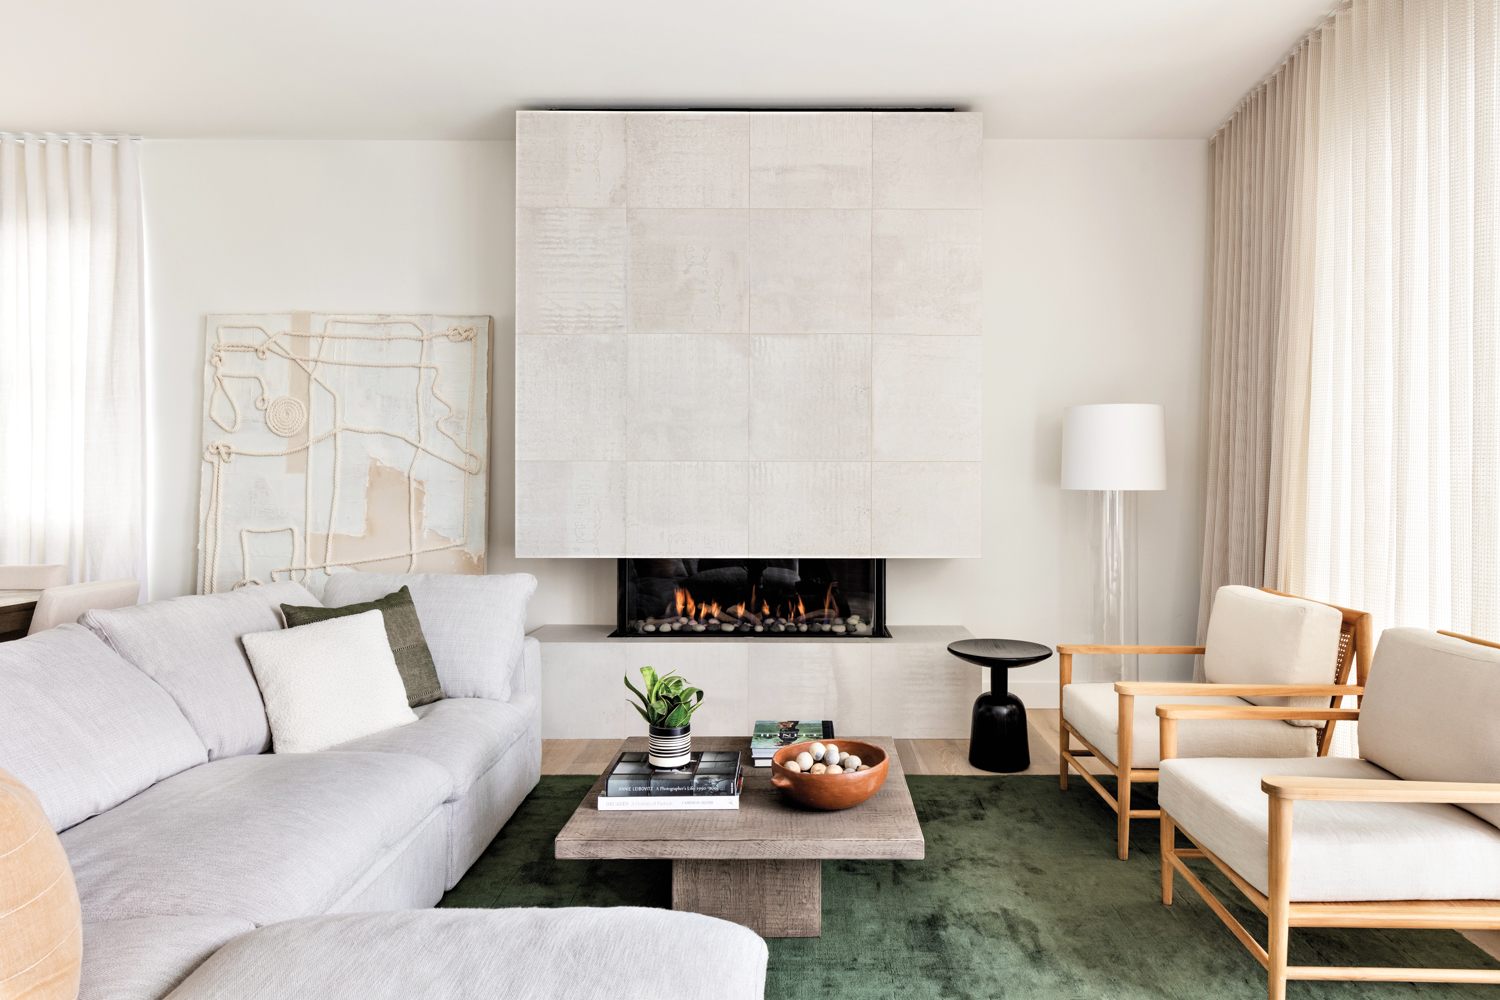 A fireplace is surrounded by white tile.